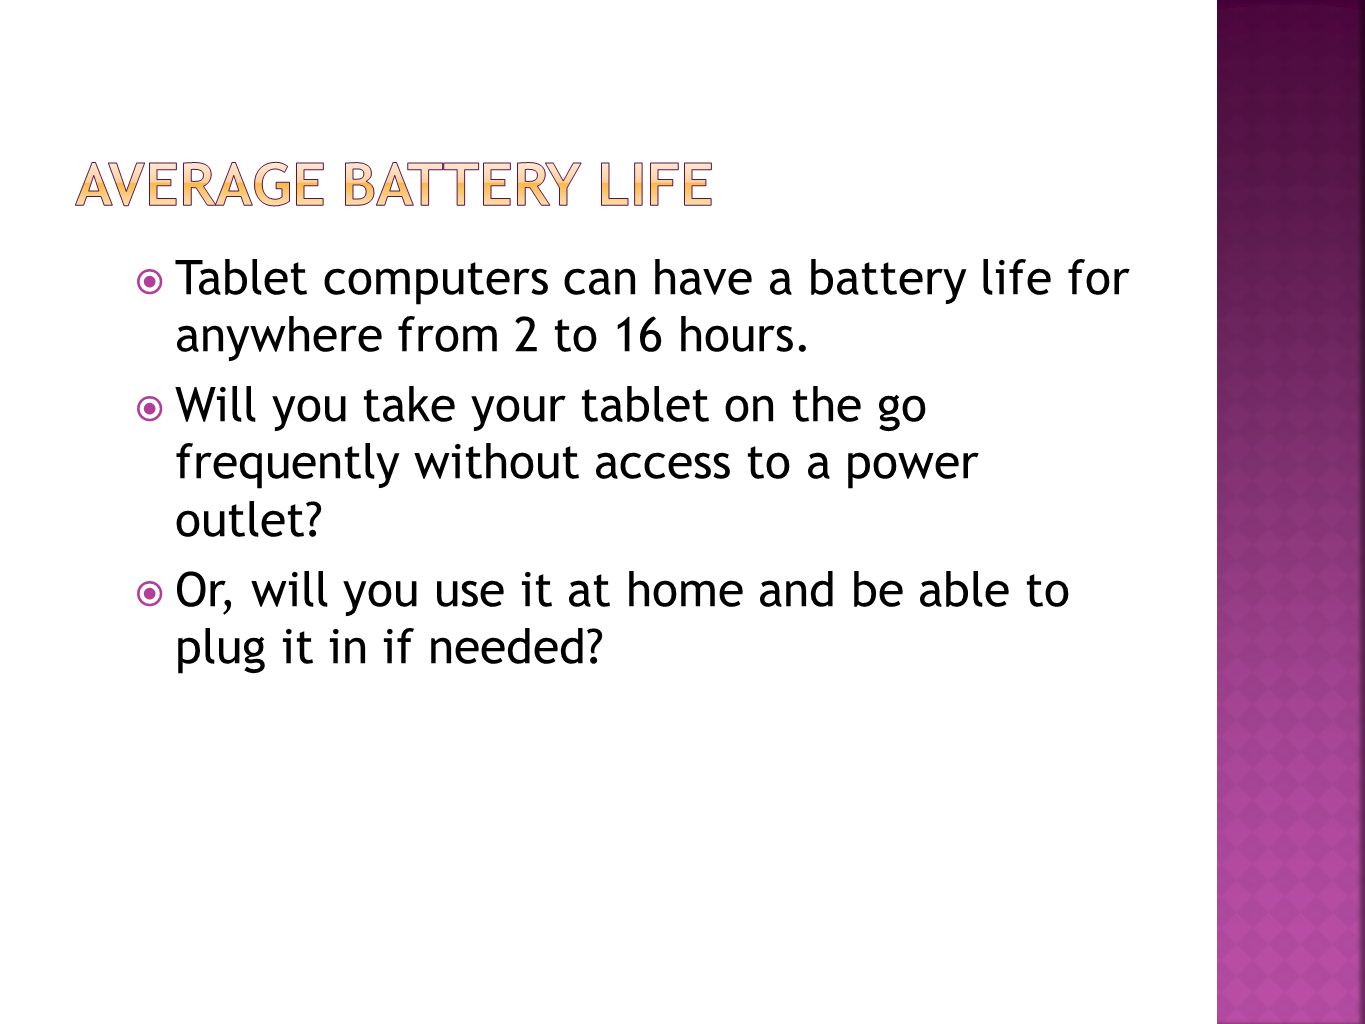  Tablet computers can have a battery life for anywhere from 2 to 16 hours.